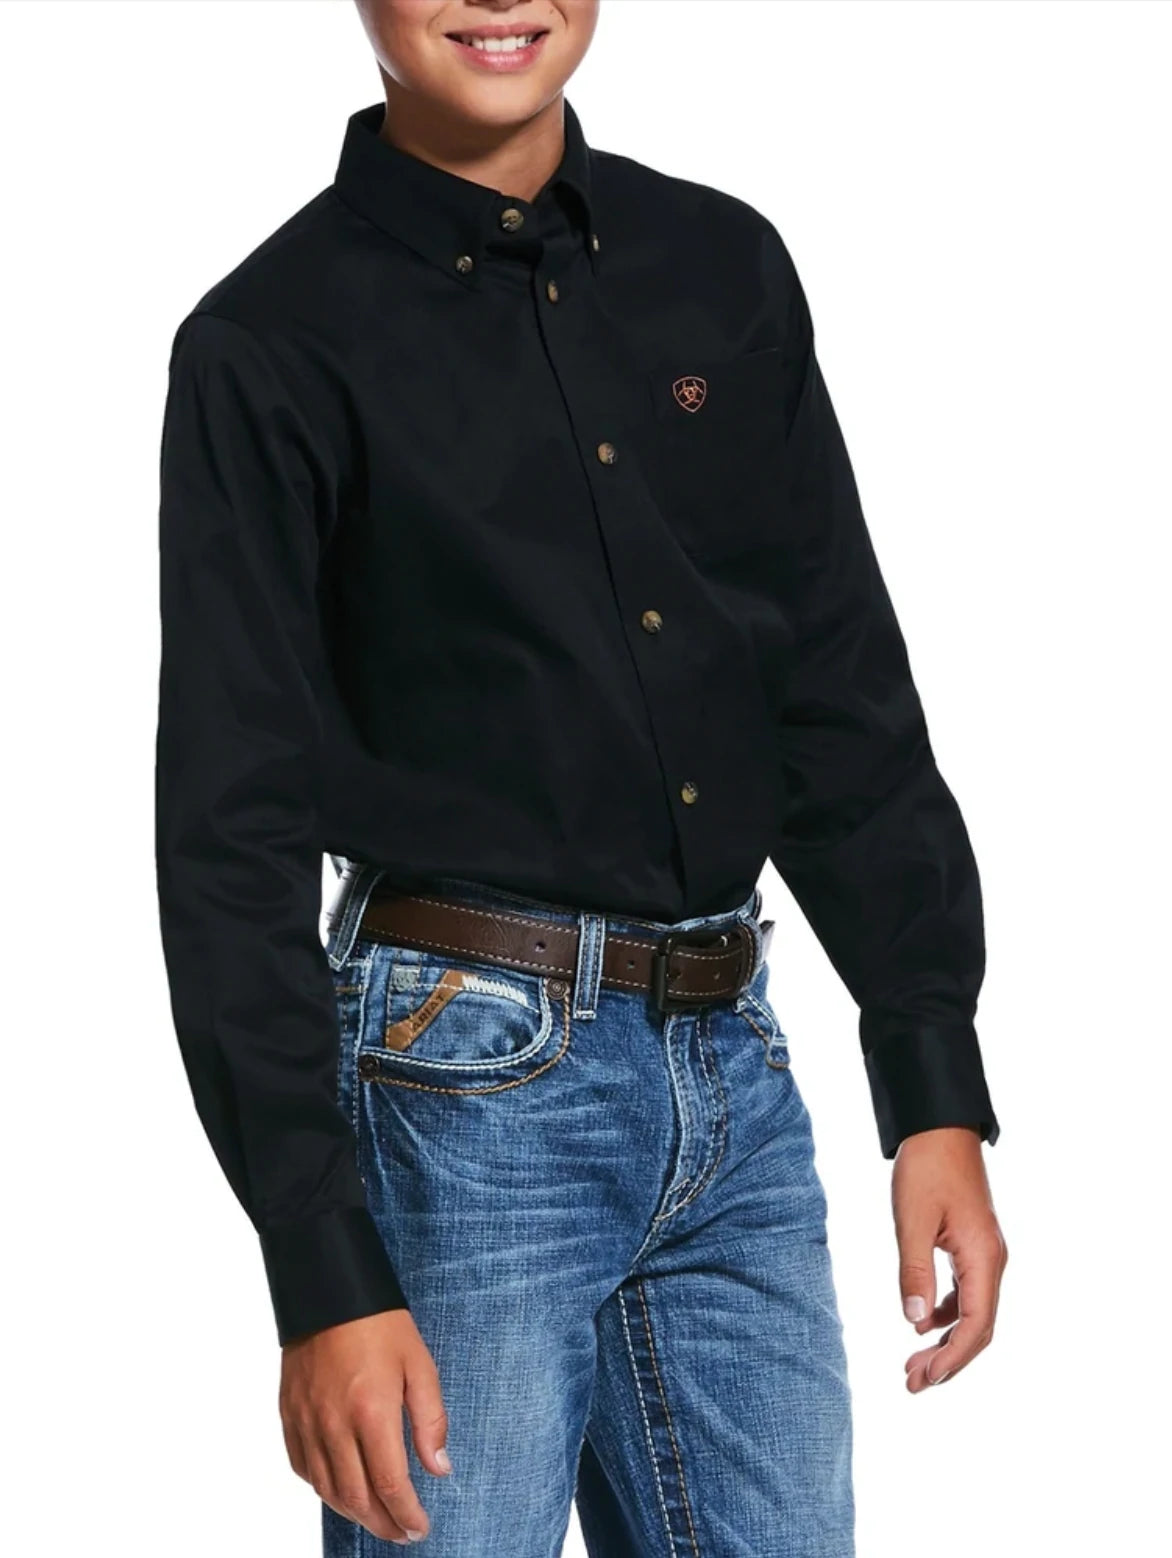 Ariat Boy's Solid Classic Fit Button Down Shirt in Black